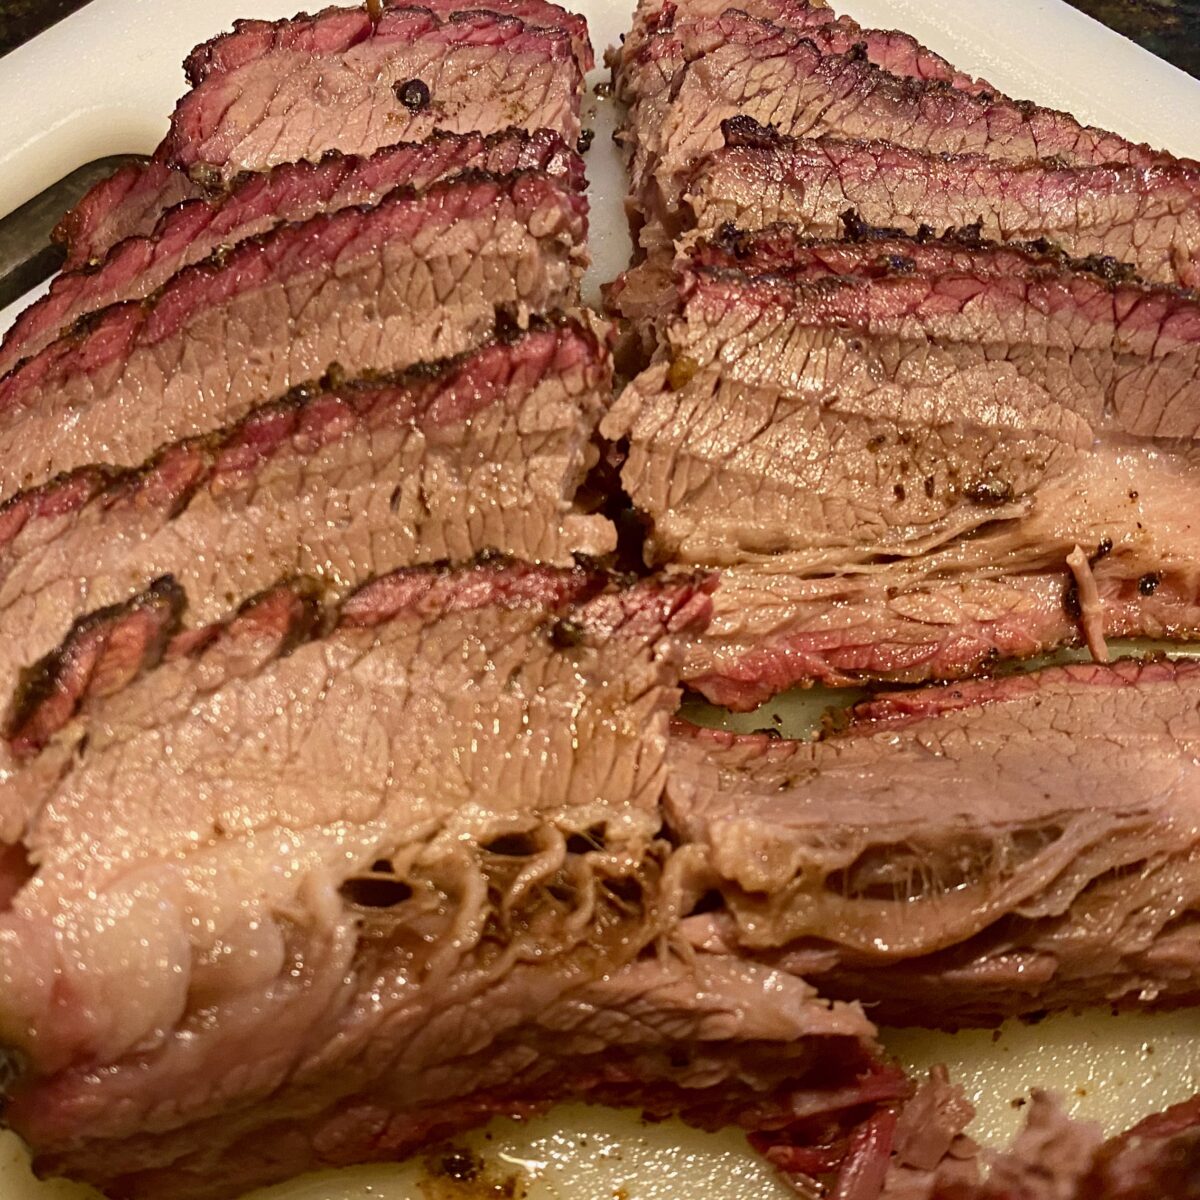 Close up view of sliced smoked brisket showing the smoke ring and juiciness of the meat.